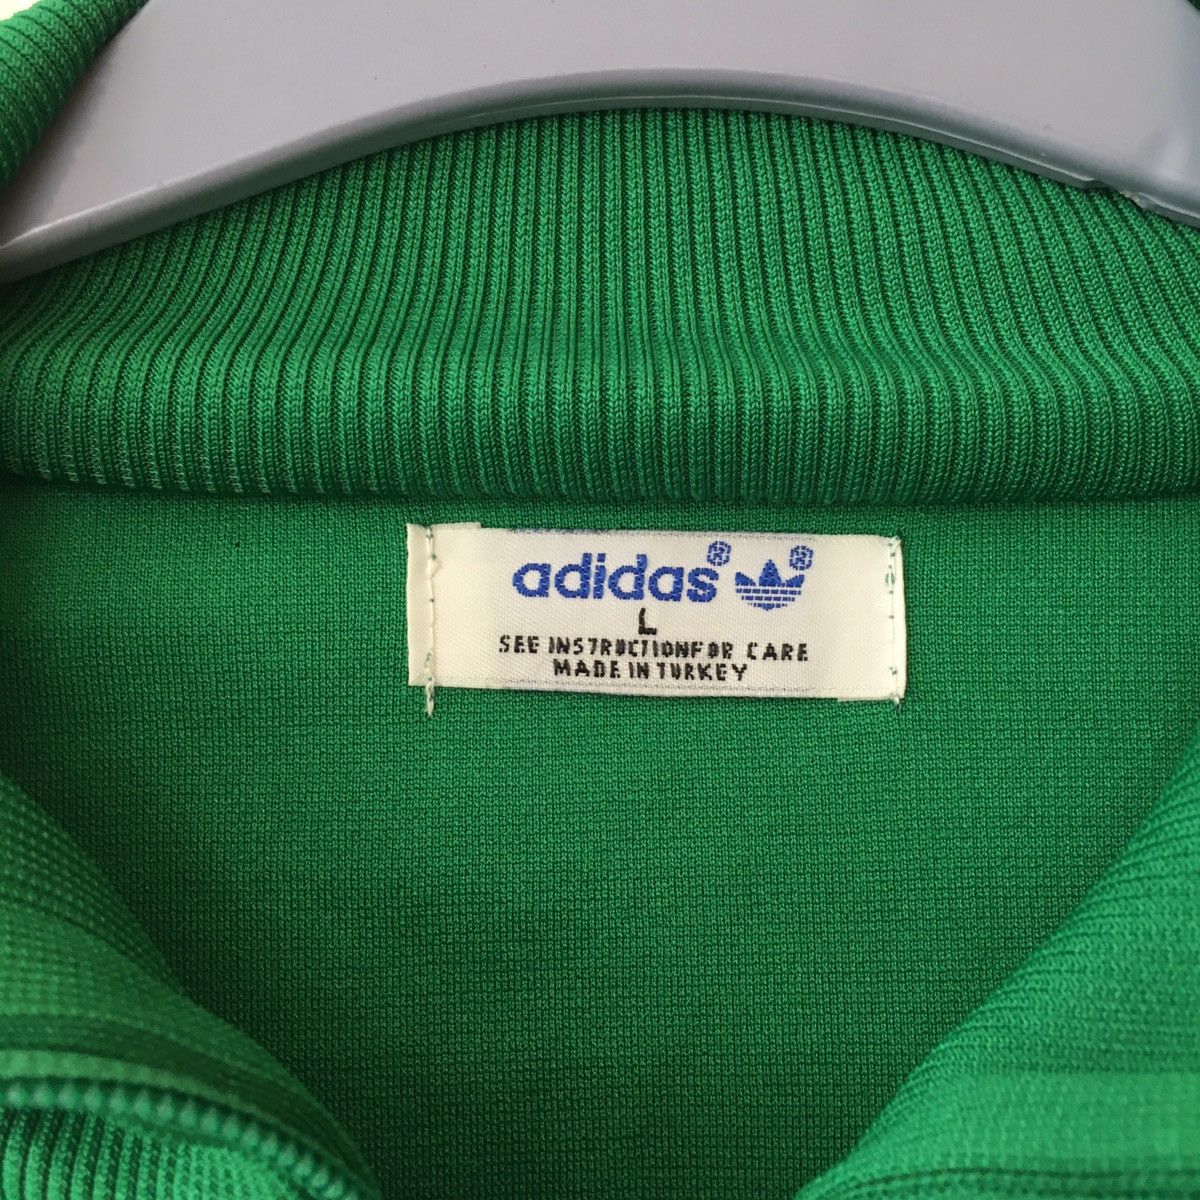 Adidas vintage 90s adidas track top Size US L / EU 52-54 / 3 - 3 Preview